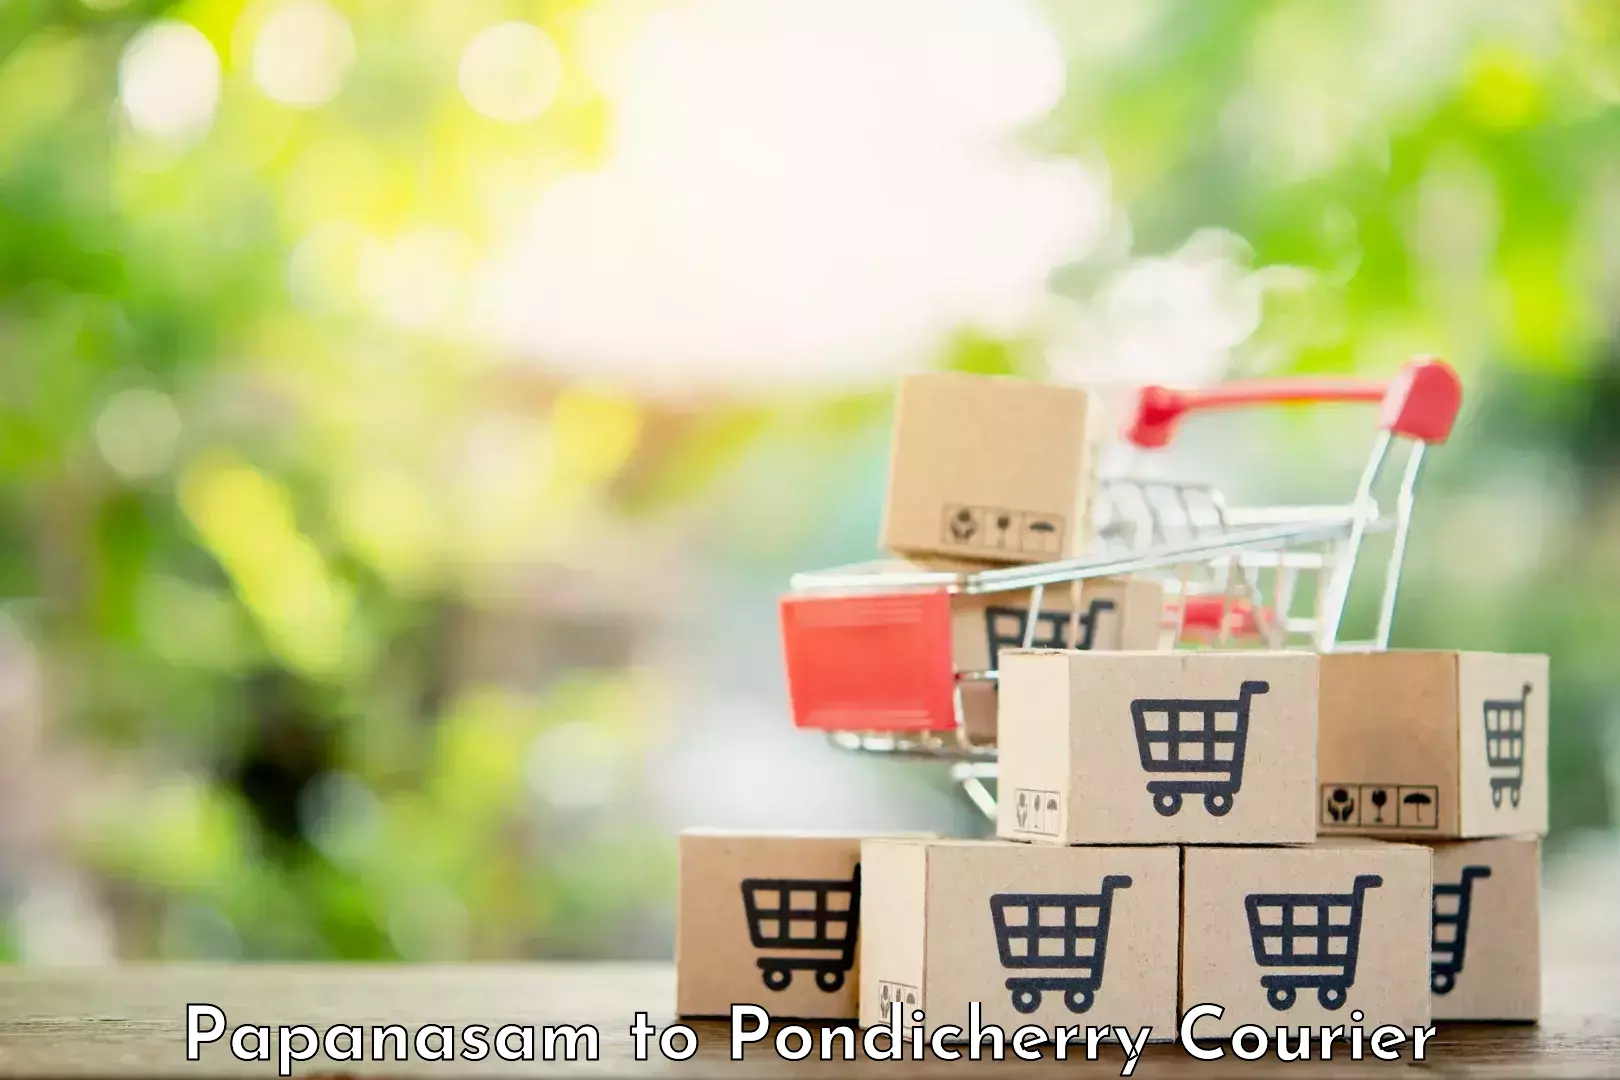 Efficient courier operations Papanasam to Pondicherry University